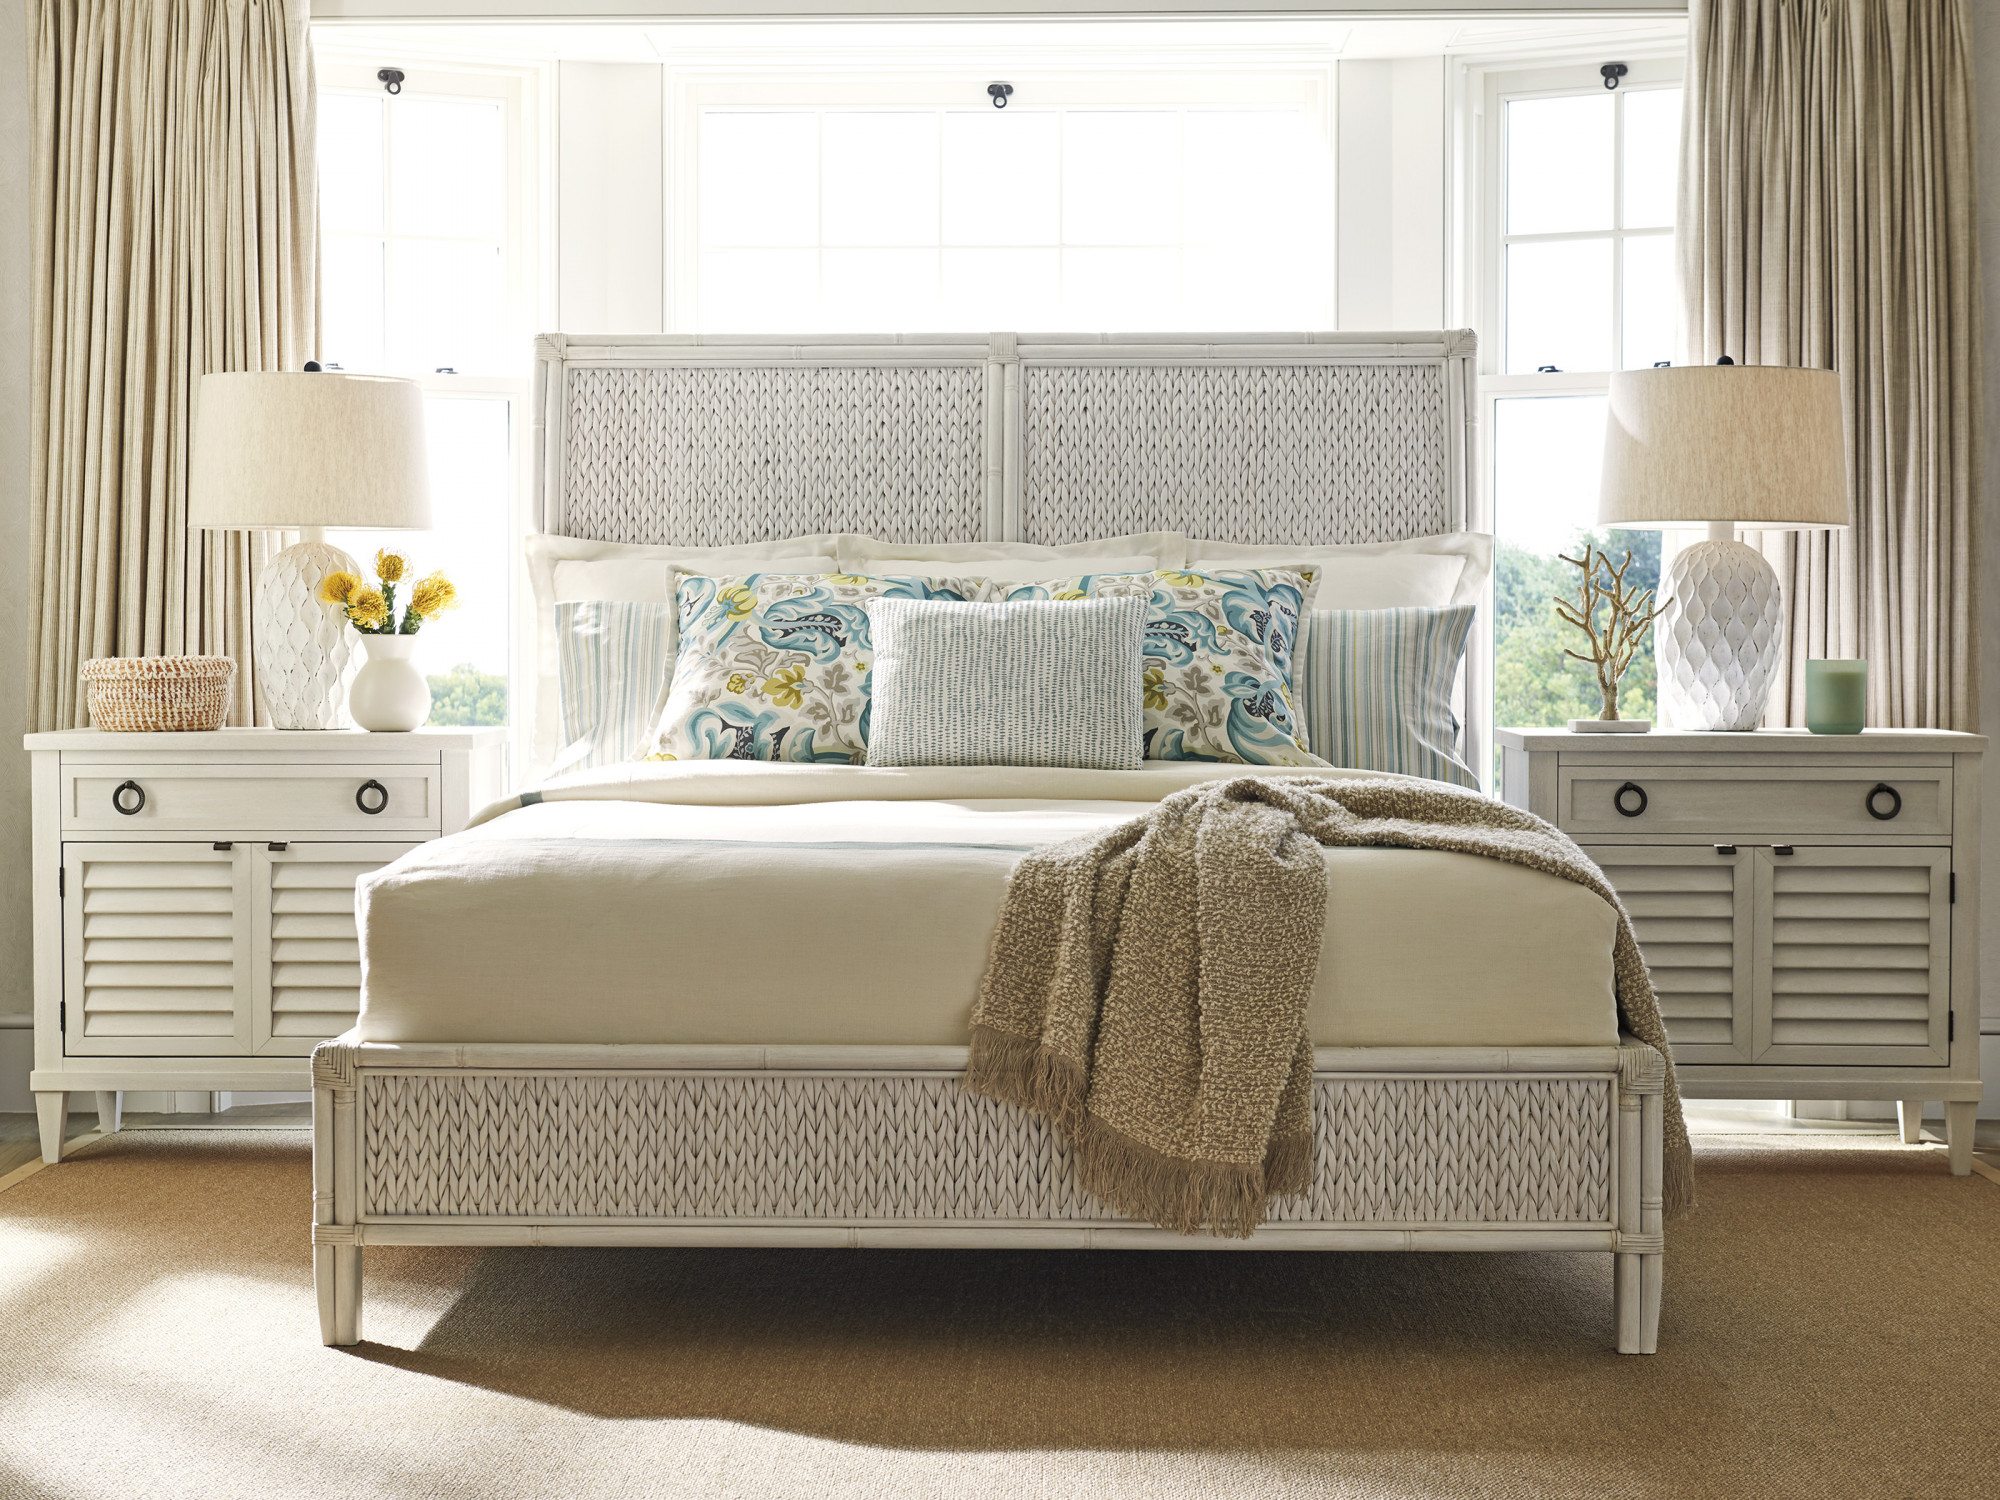 Siesta Key Woven Bed, Tommy Bahama King Bed